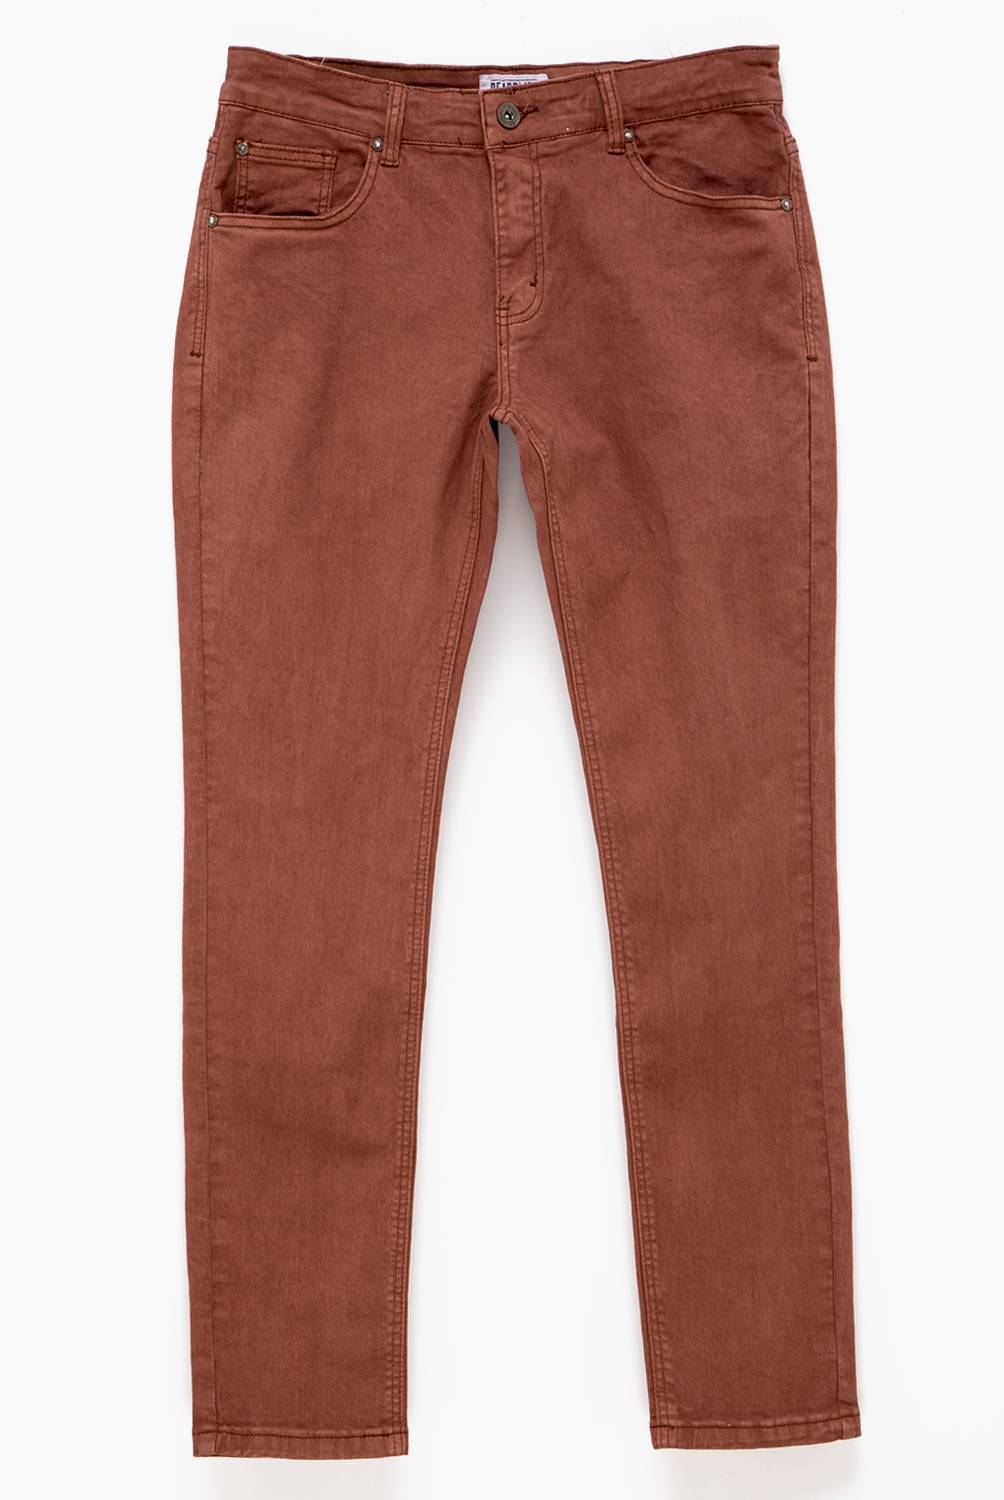 Bearcliff - Jeans Skinny Fit Hombre